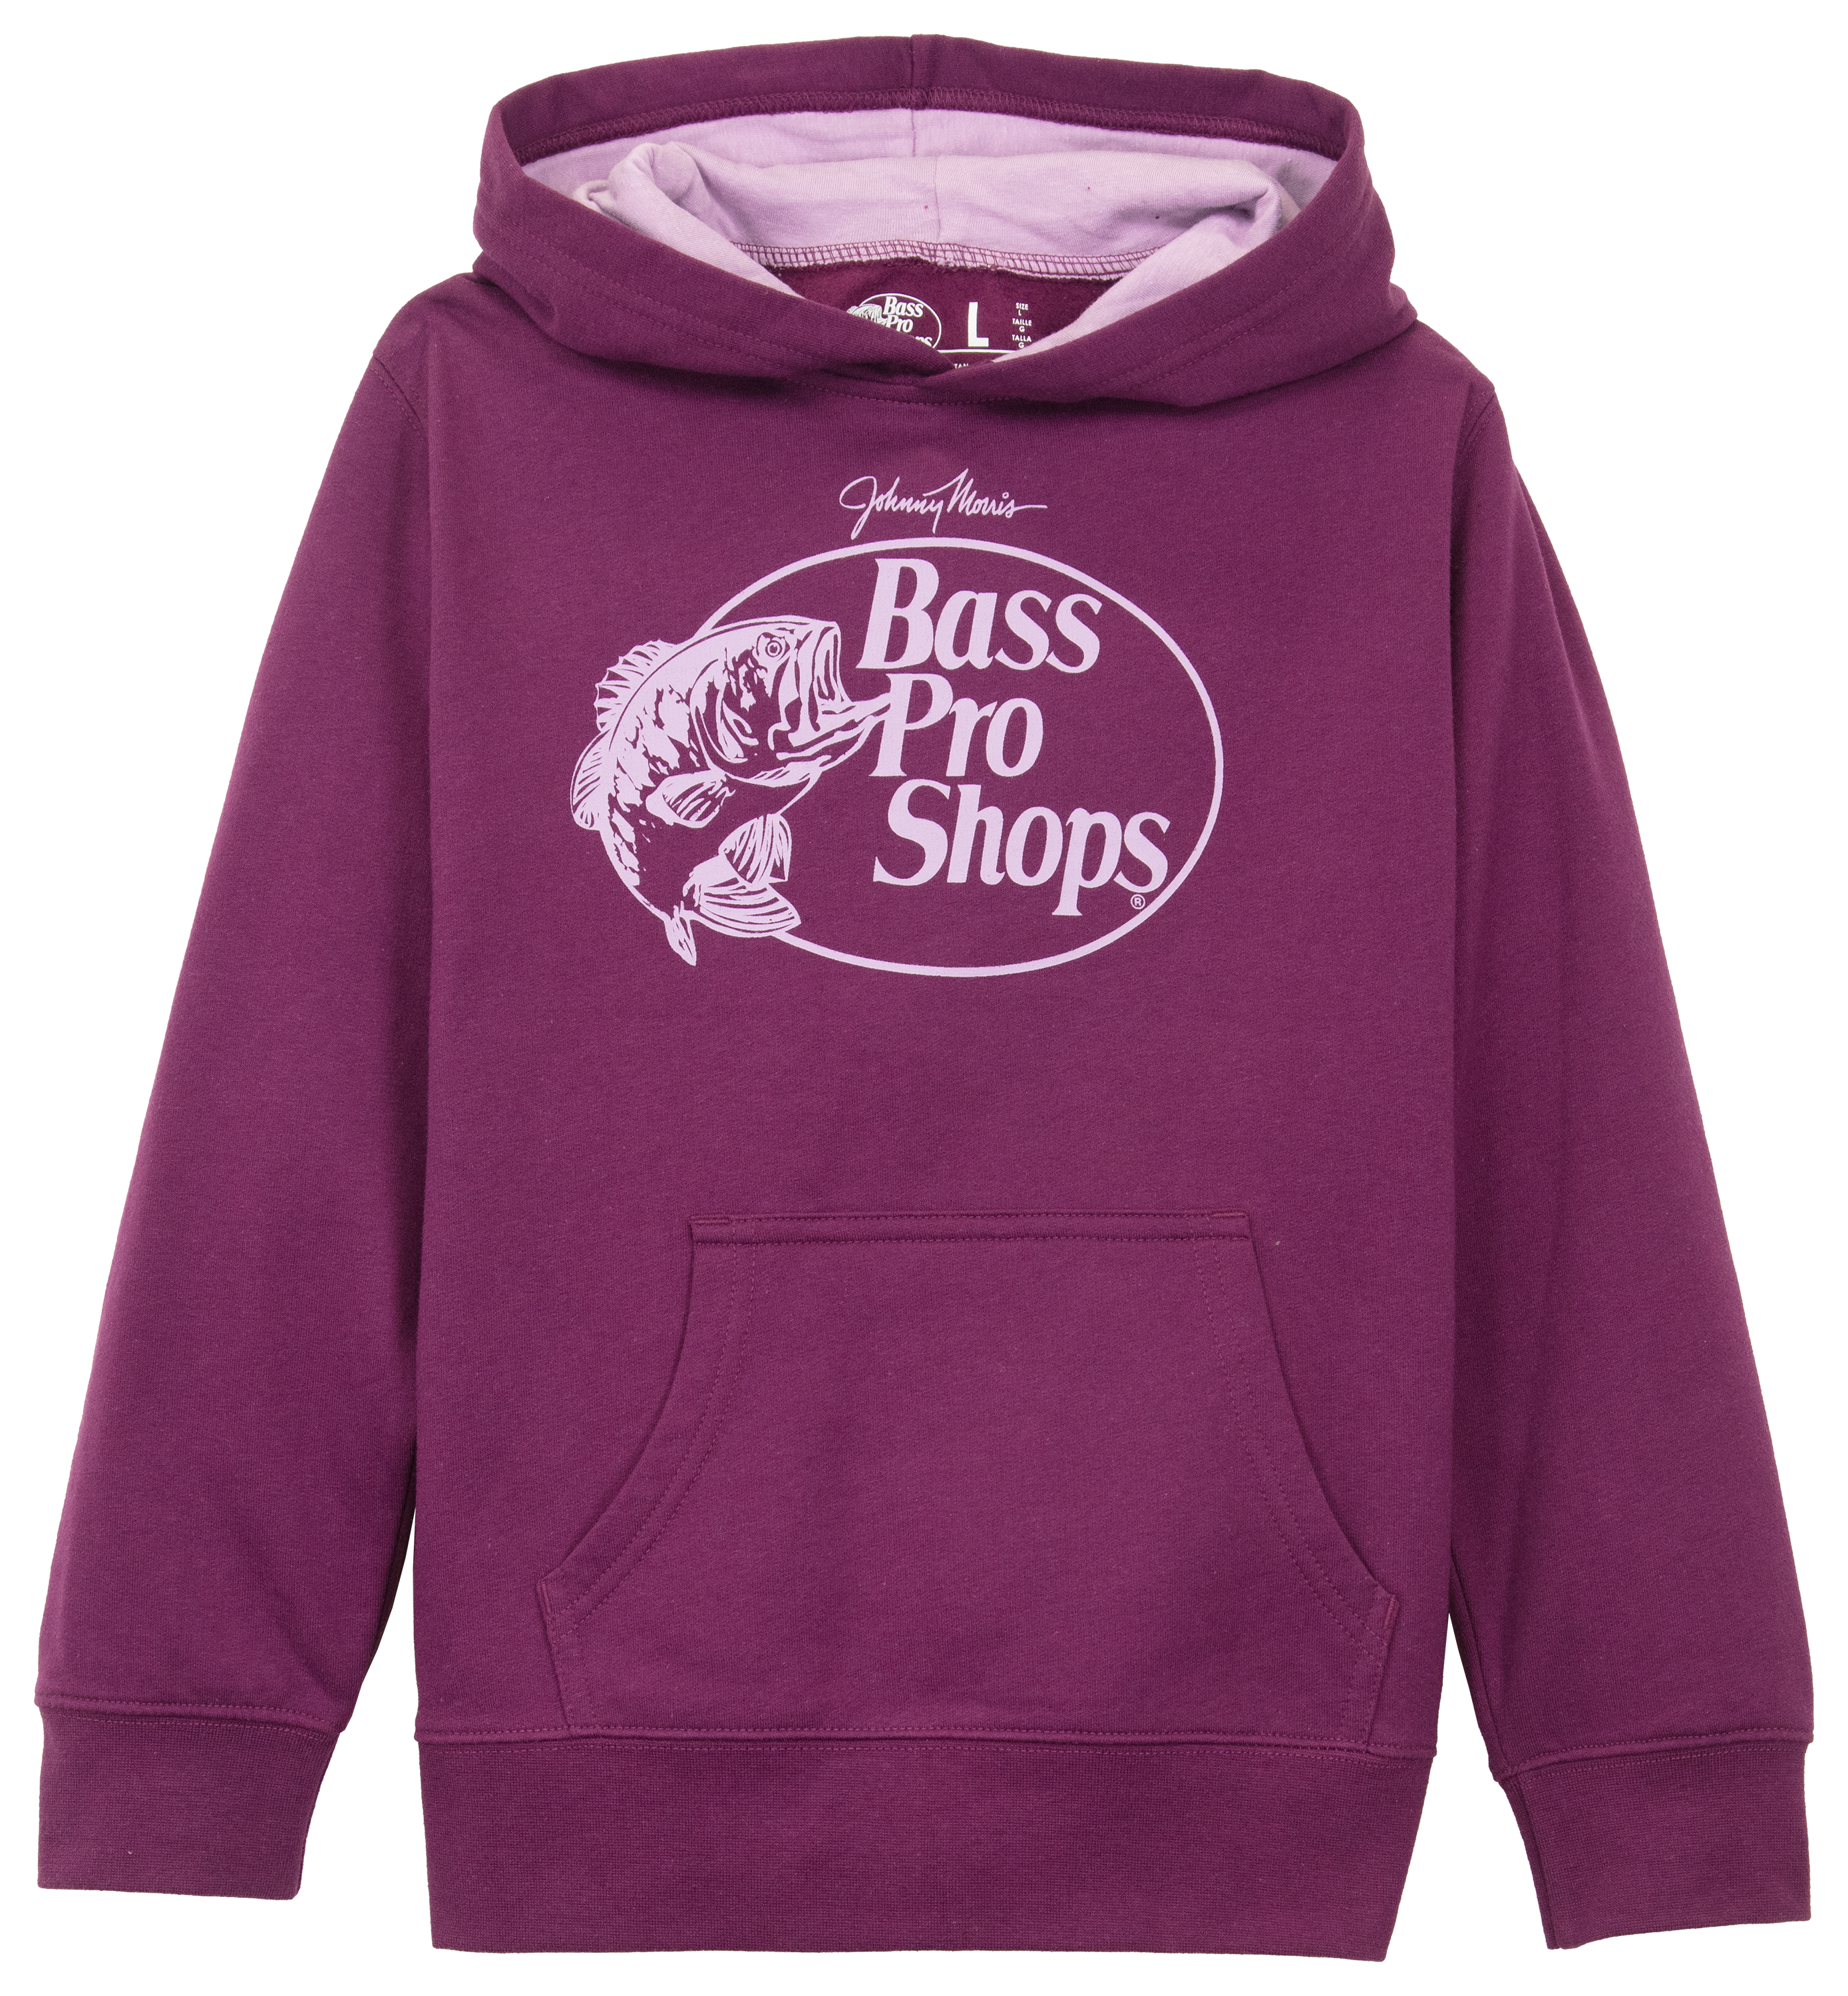 Bass Pro Shops Long-Sleeve Hoodie for Toddlers or Girls